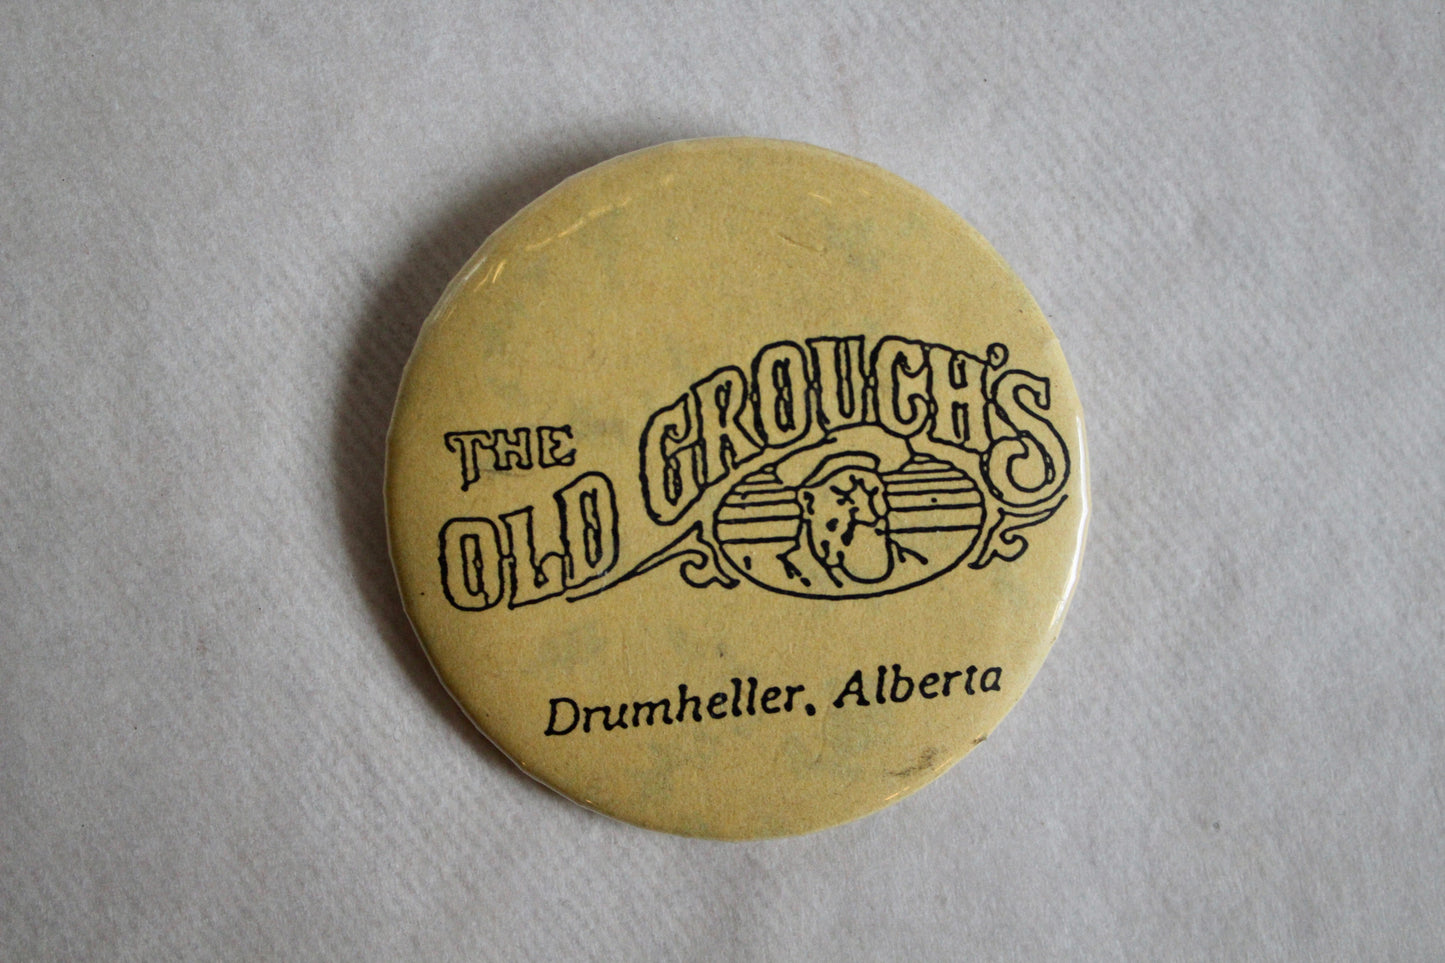 Retro Button - The Old Grouch's